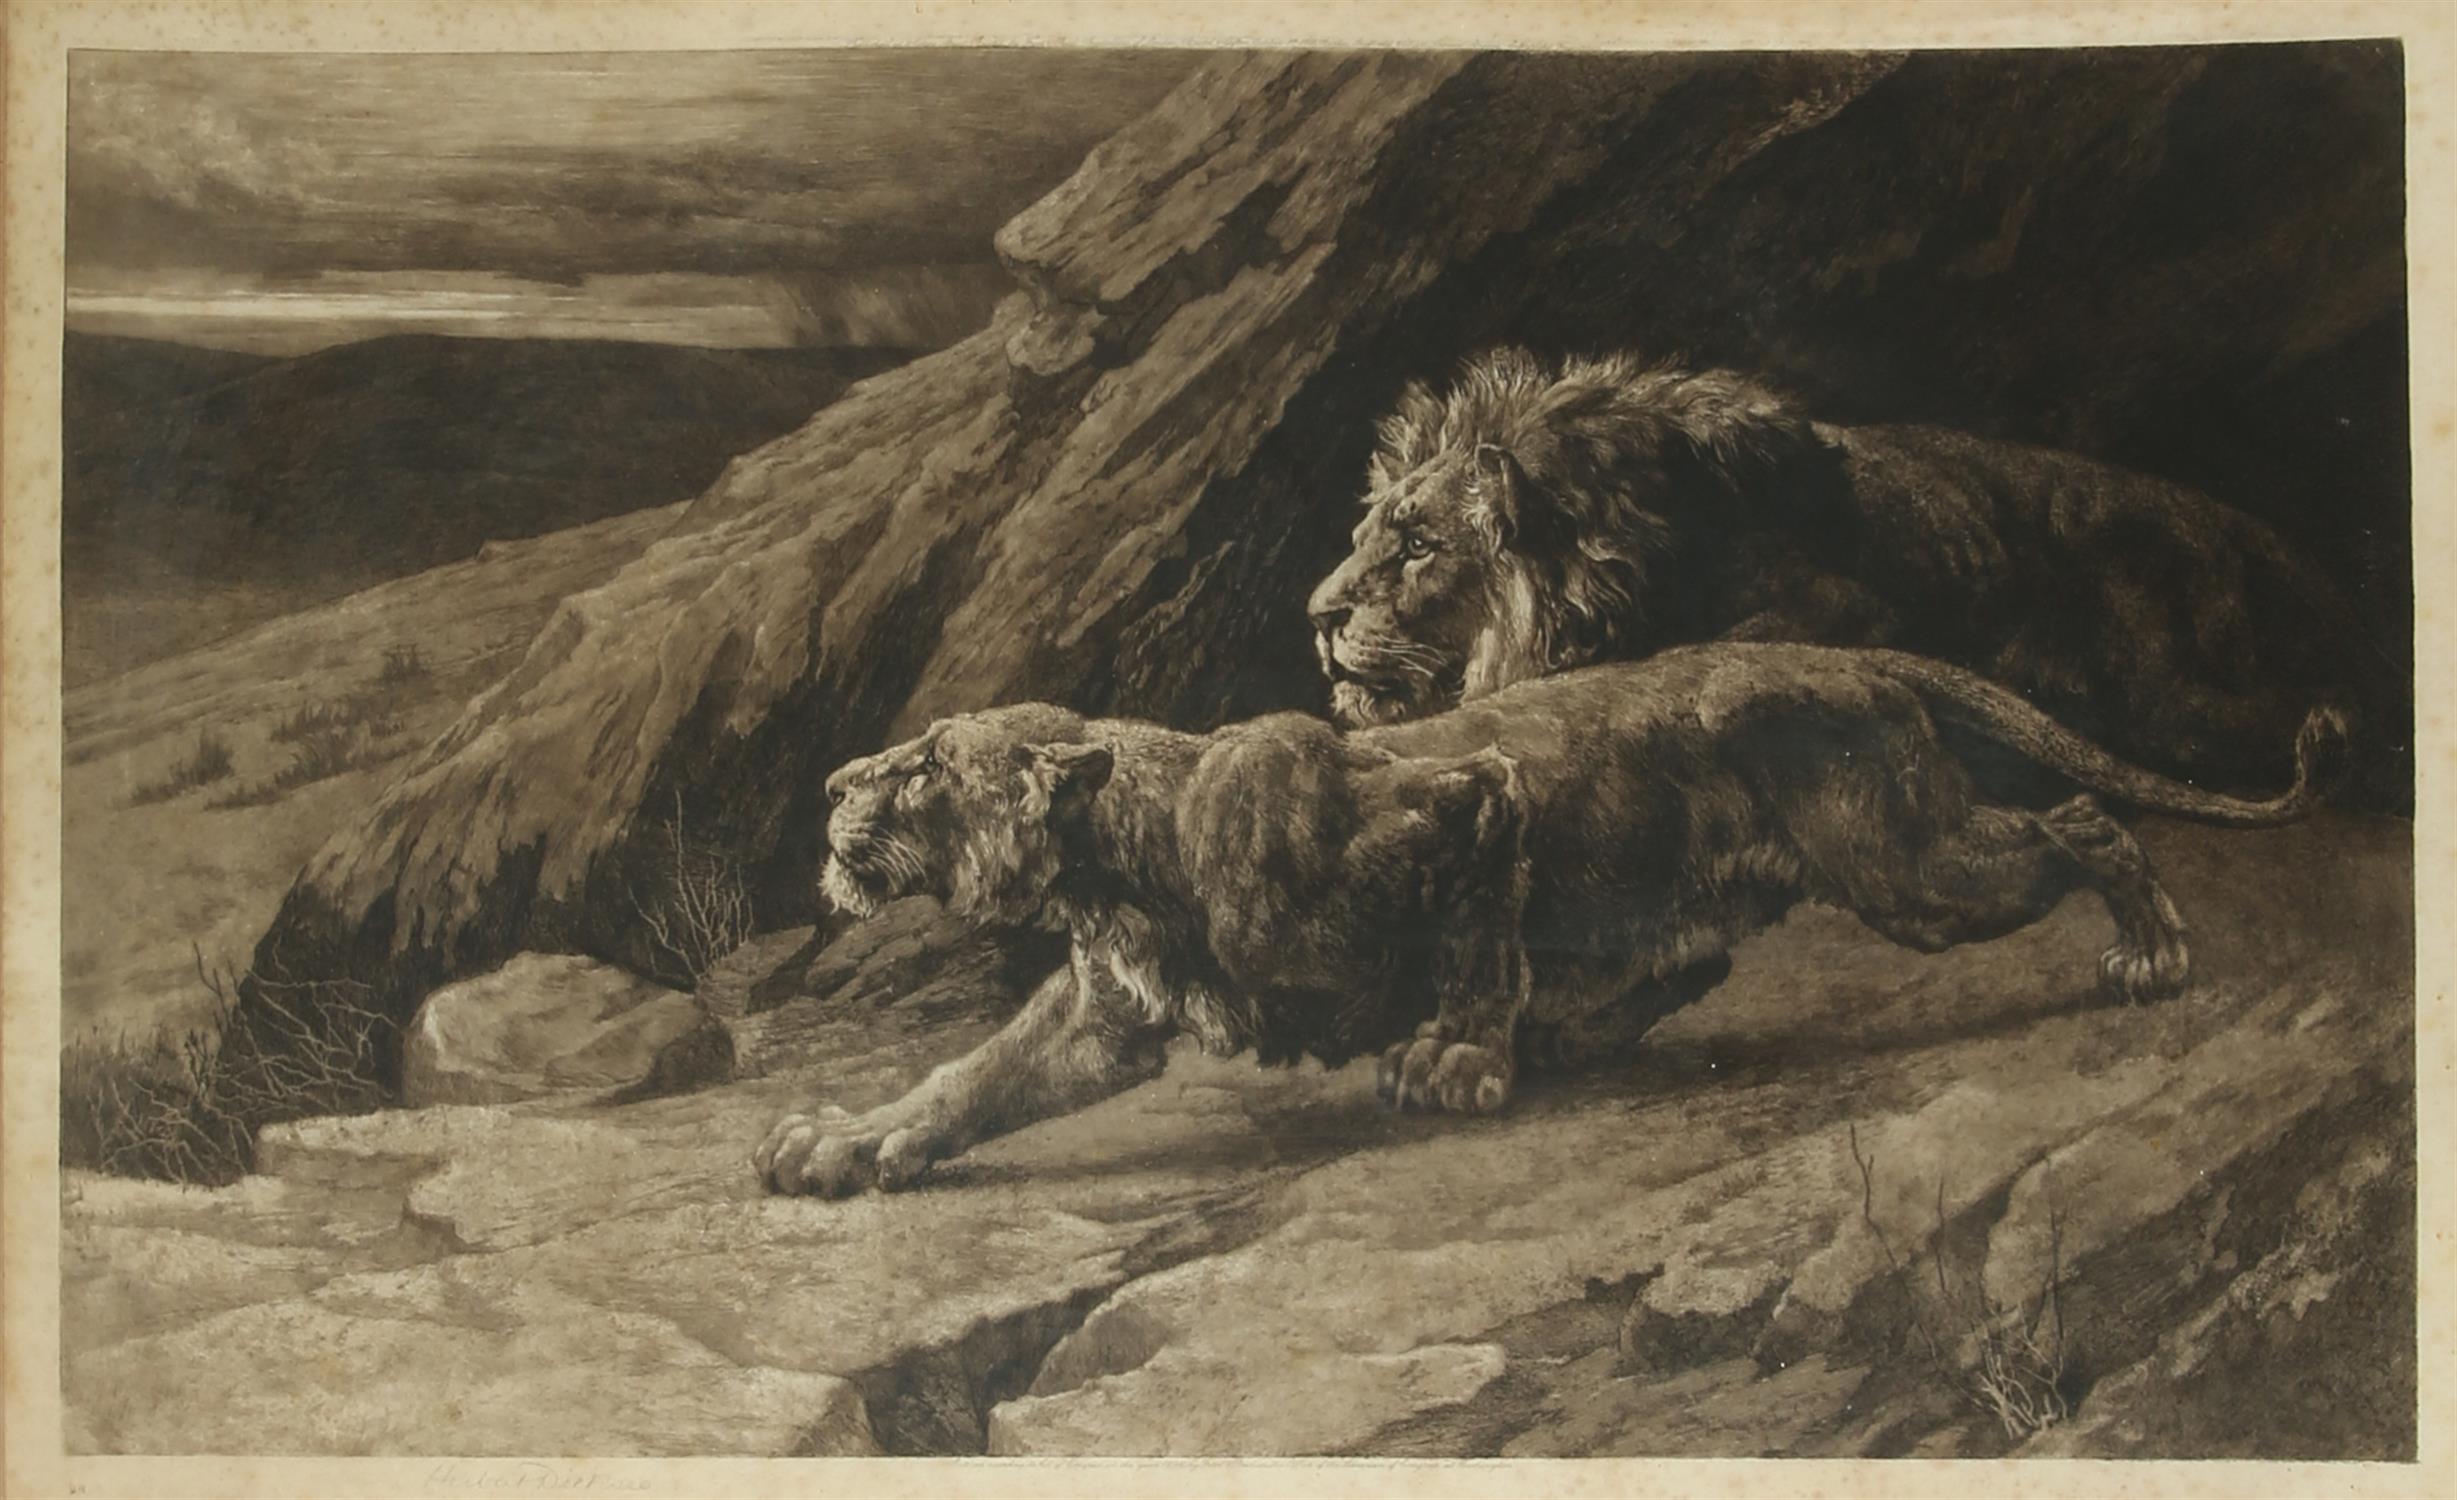 Herbert Dicksee (English, 1862-1942), Raiders: Lion and Lioness stalking, etching,